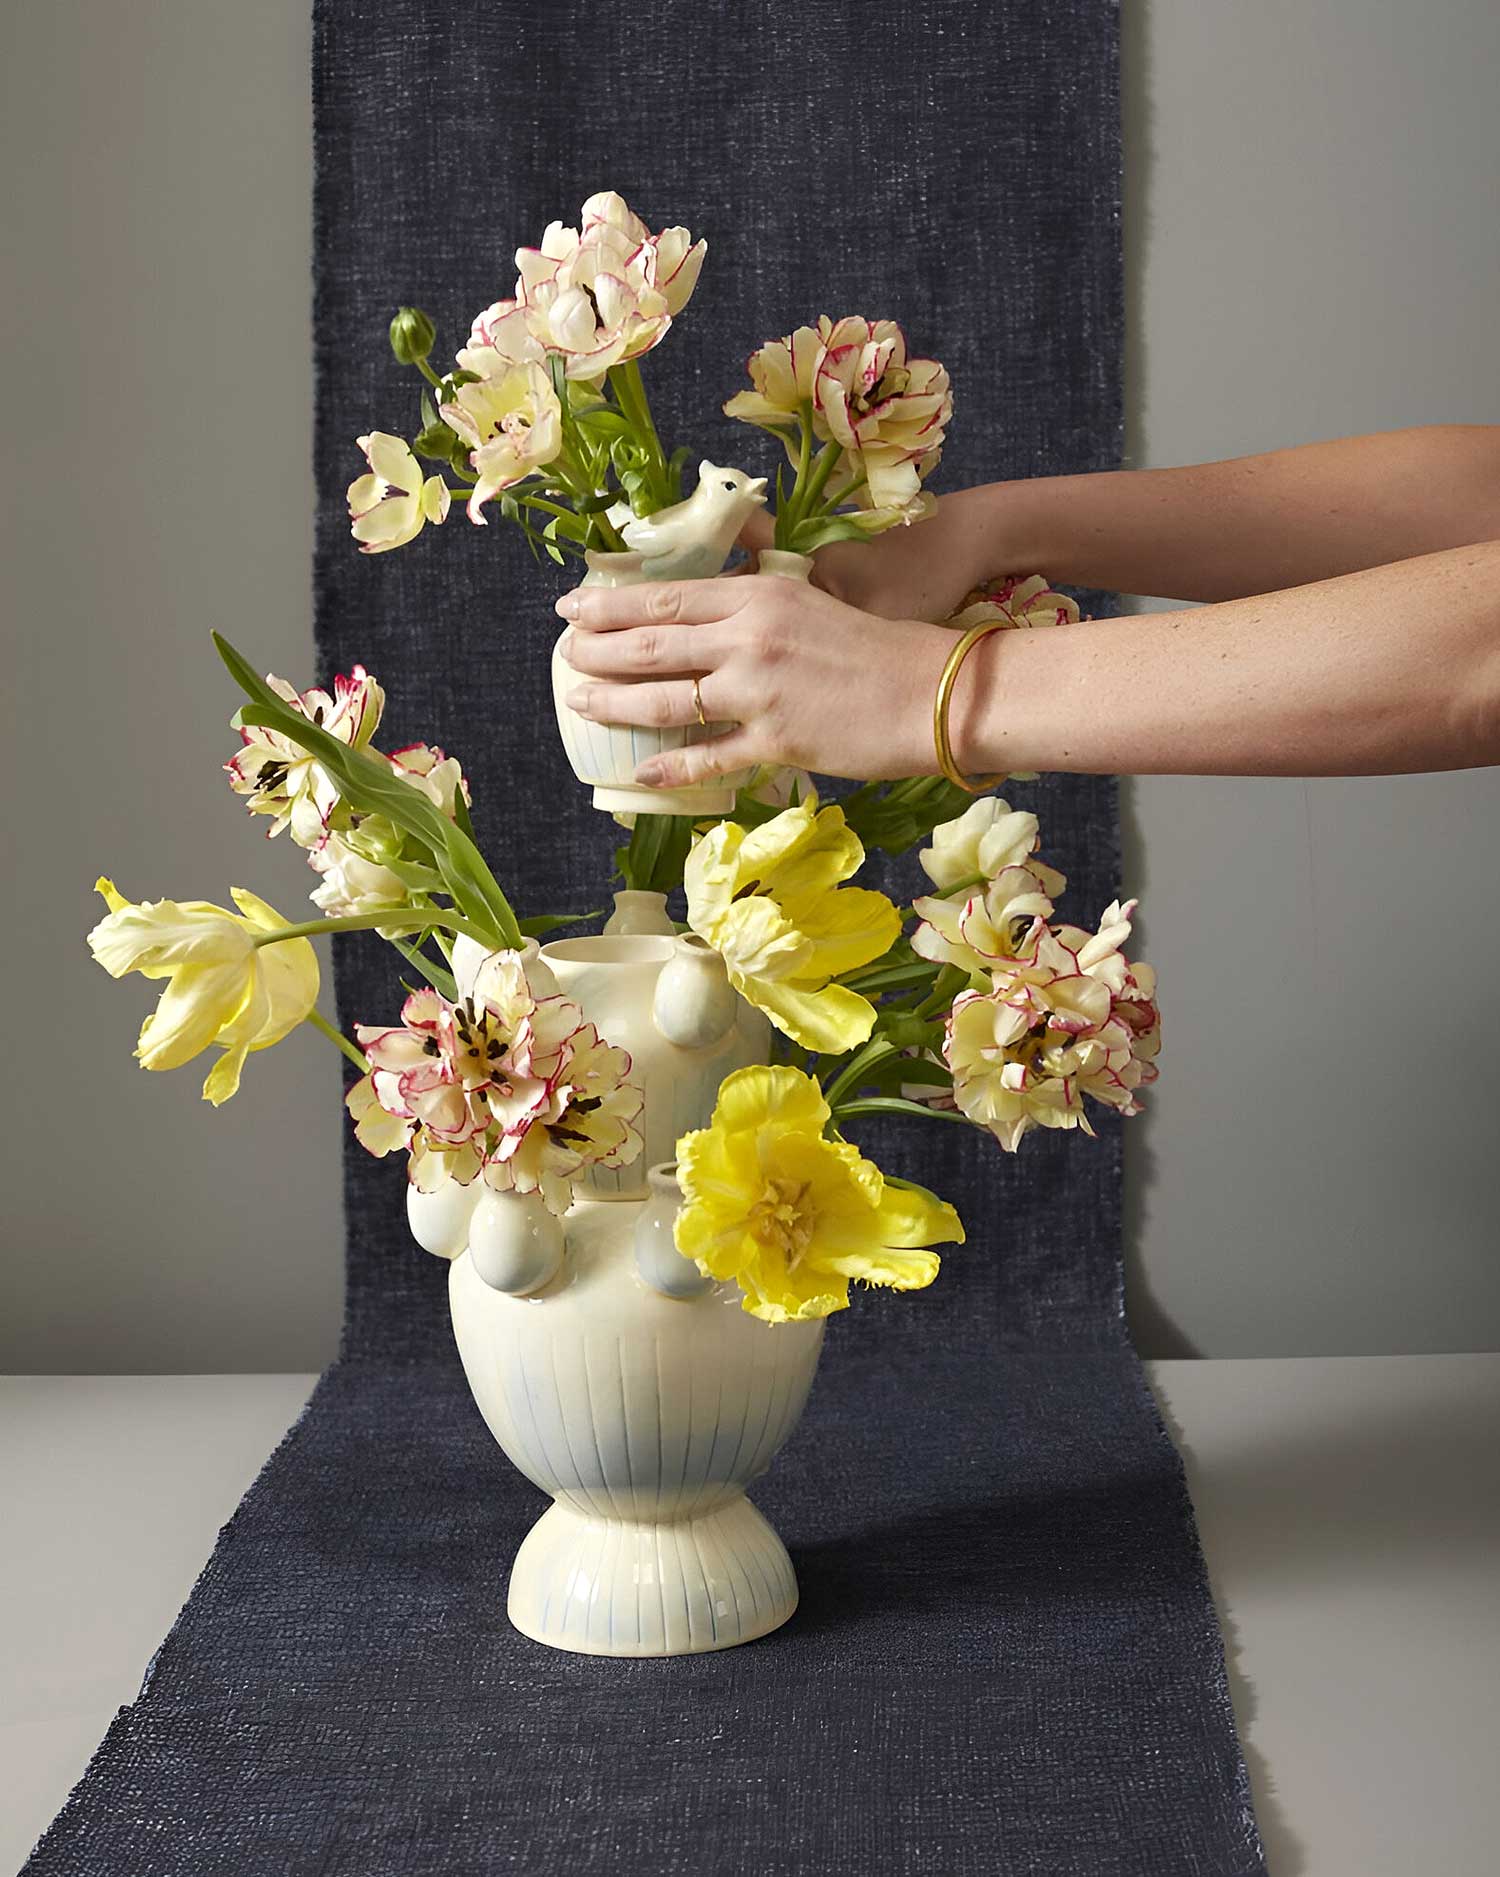 Stackable Vases getting filled with flowers